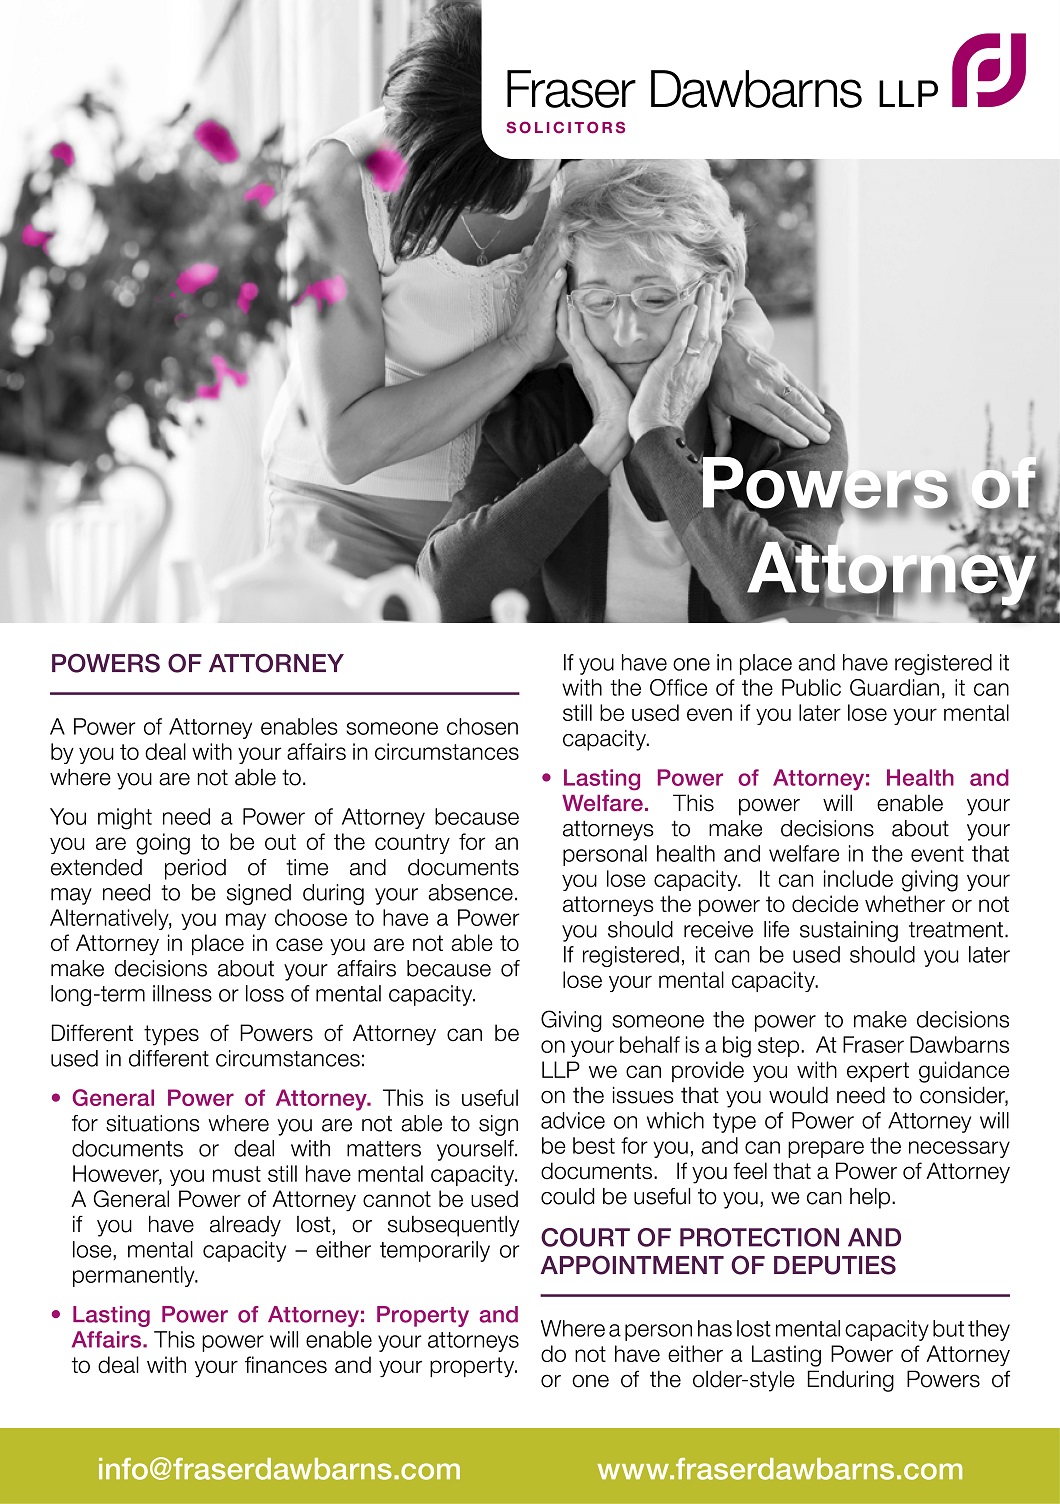 powers_of_attorney